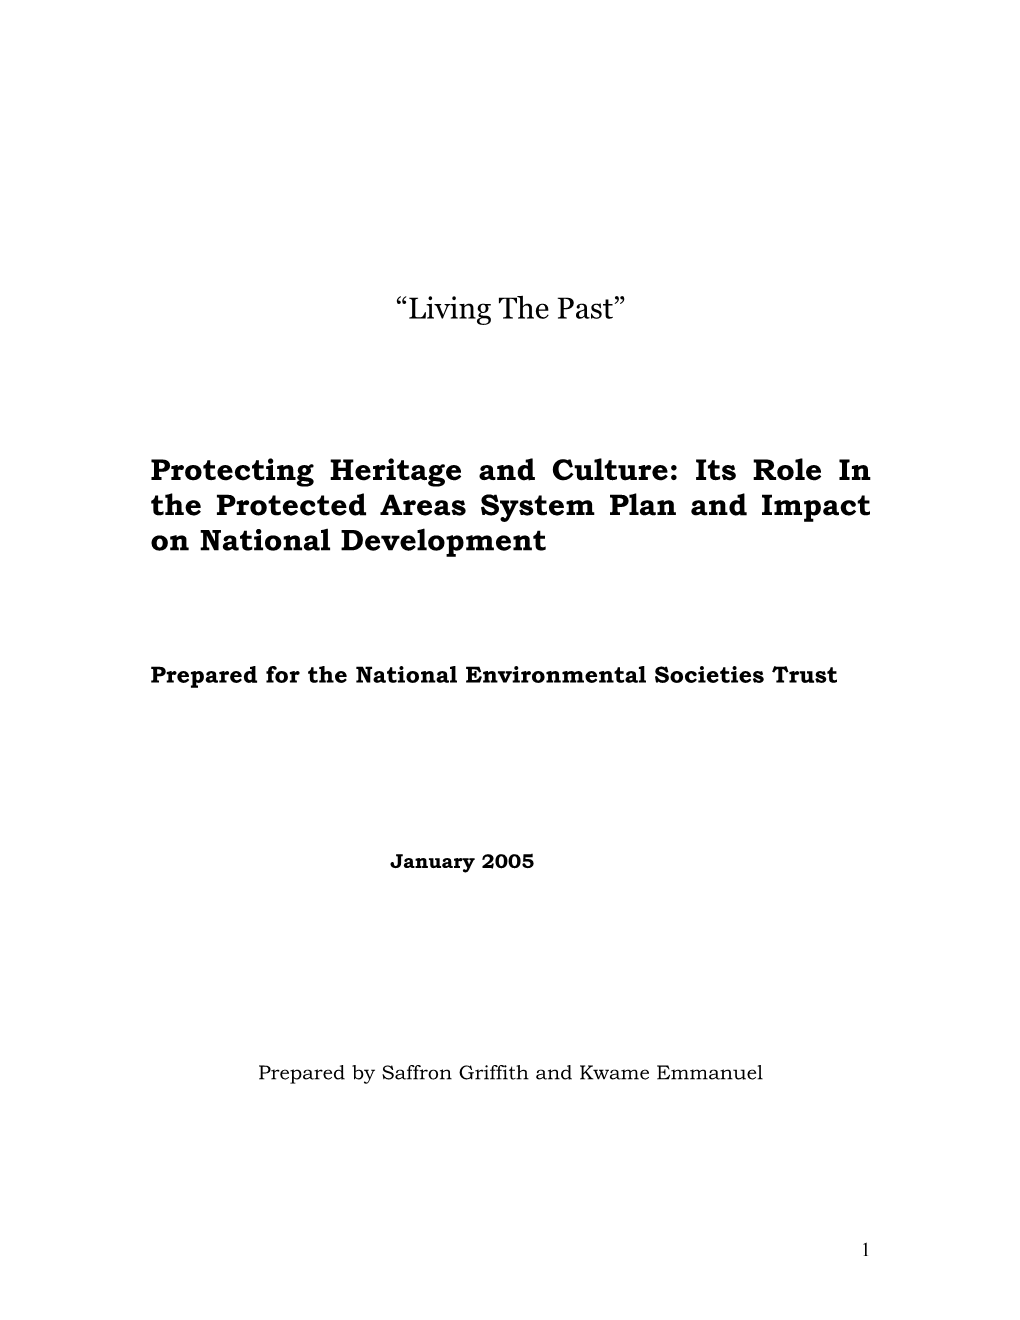 Heritage and Culture Report 2005